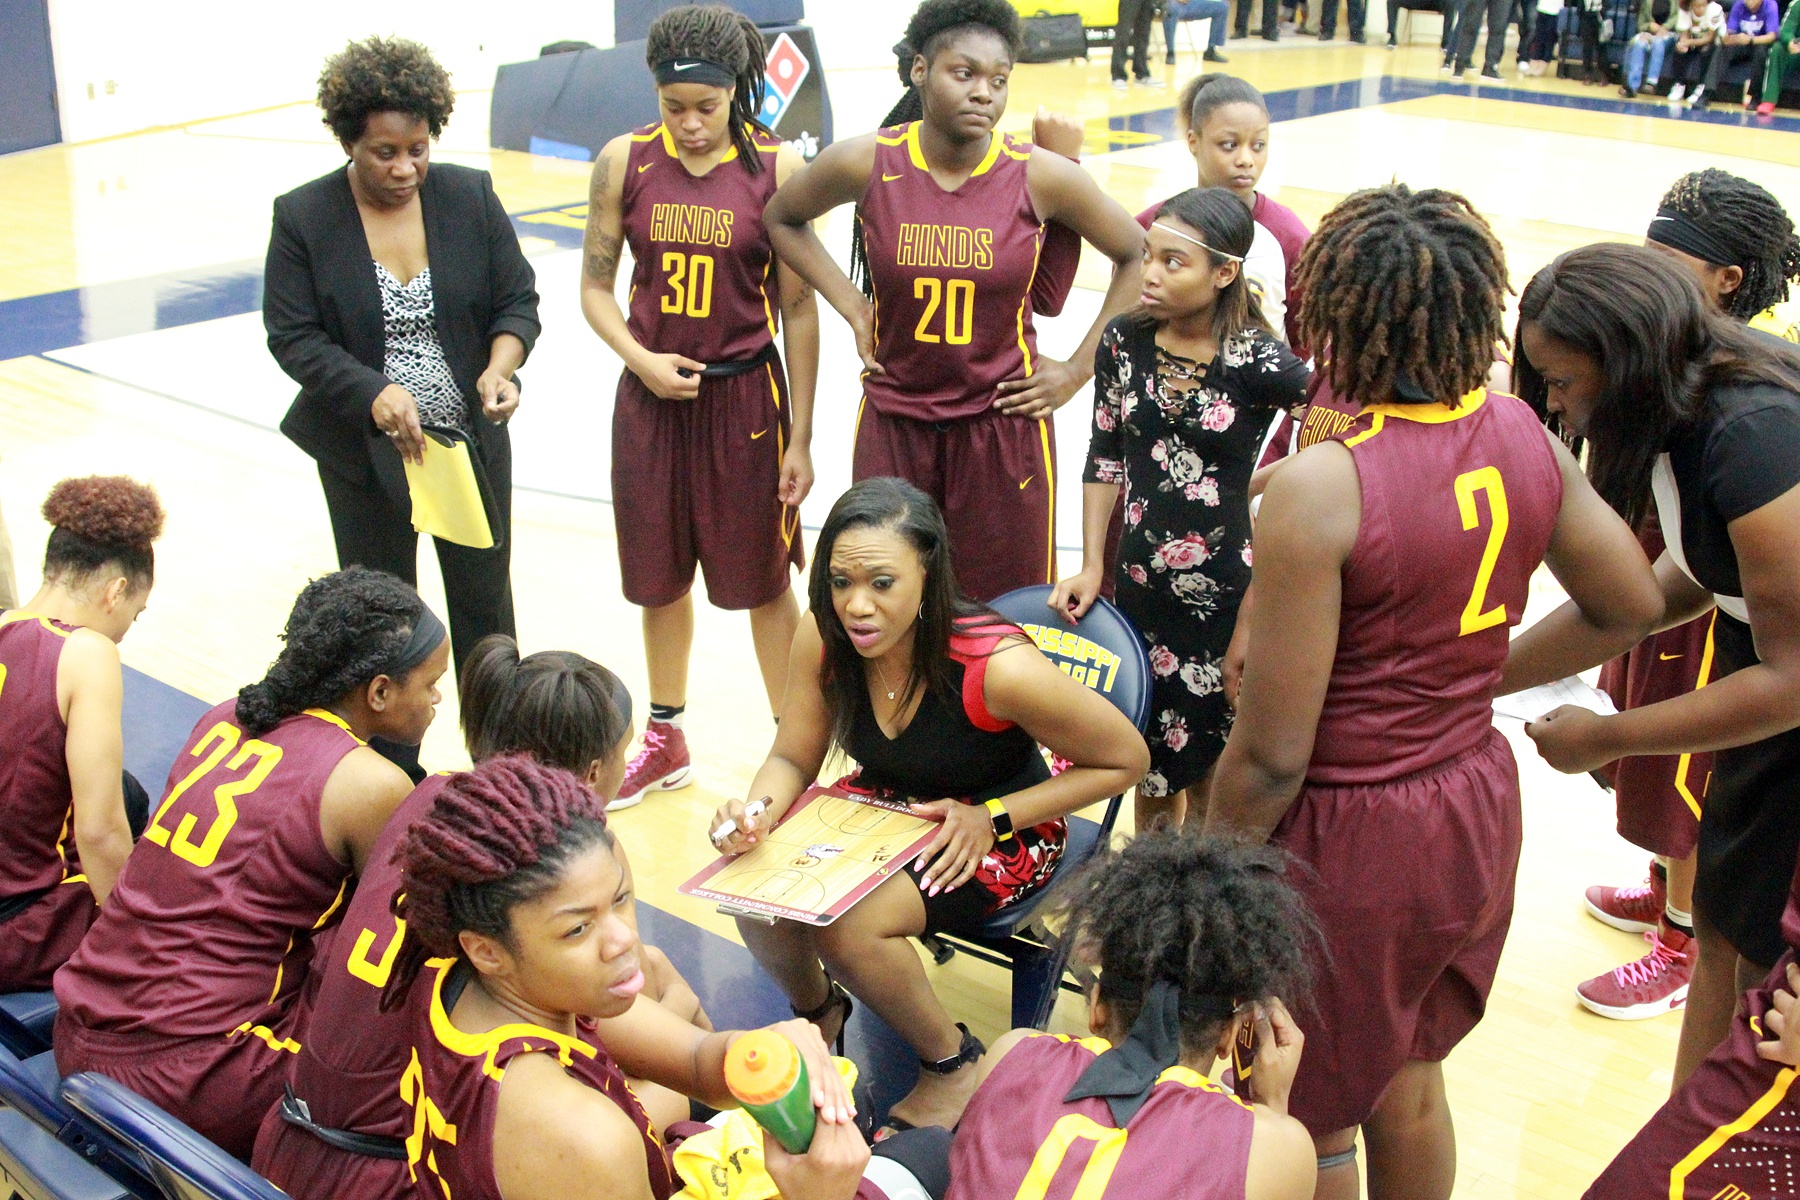 Hinds CC Utica Campus women's basketball progresses under Coach Reed